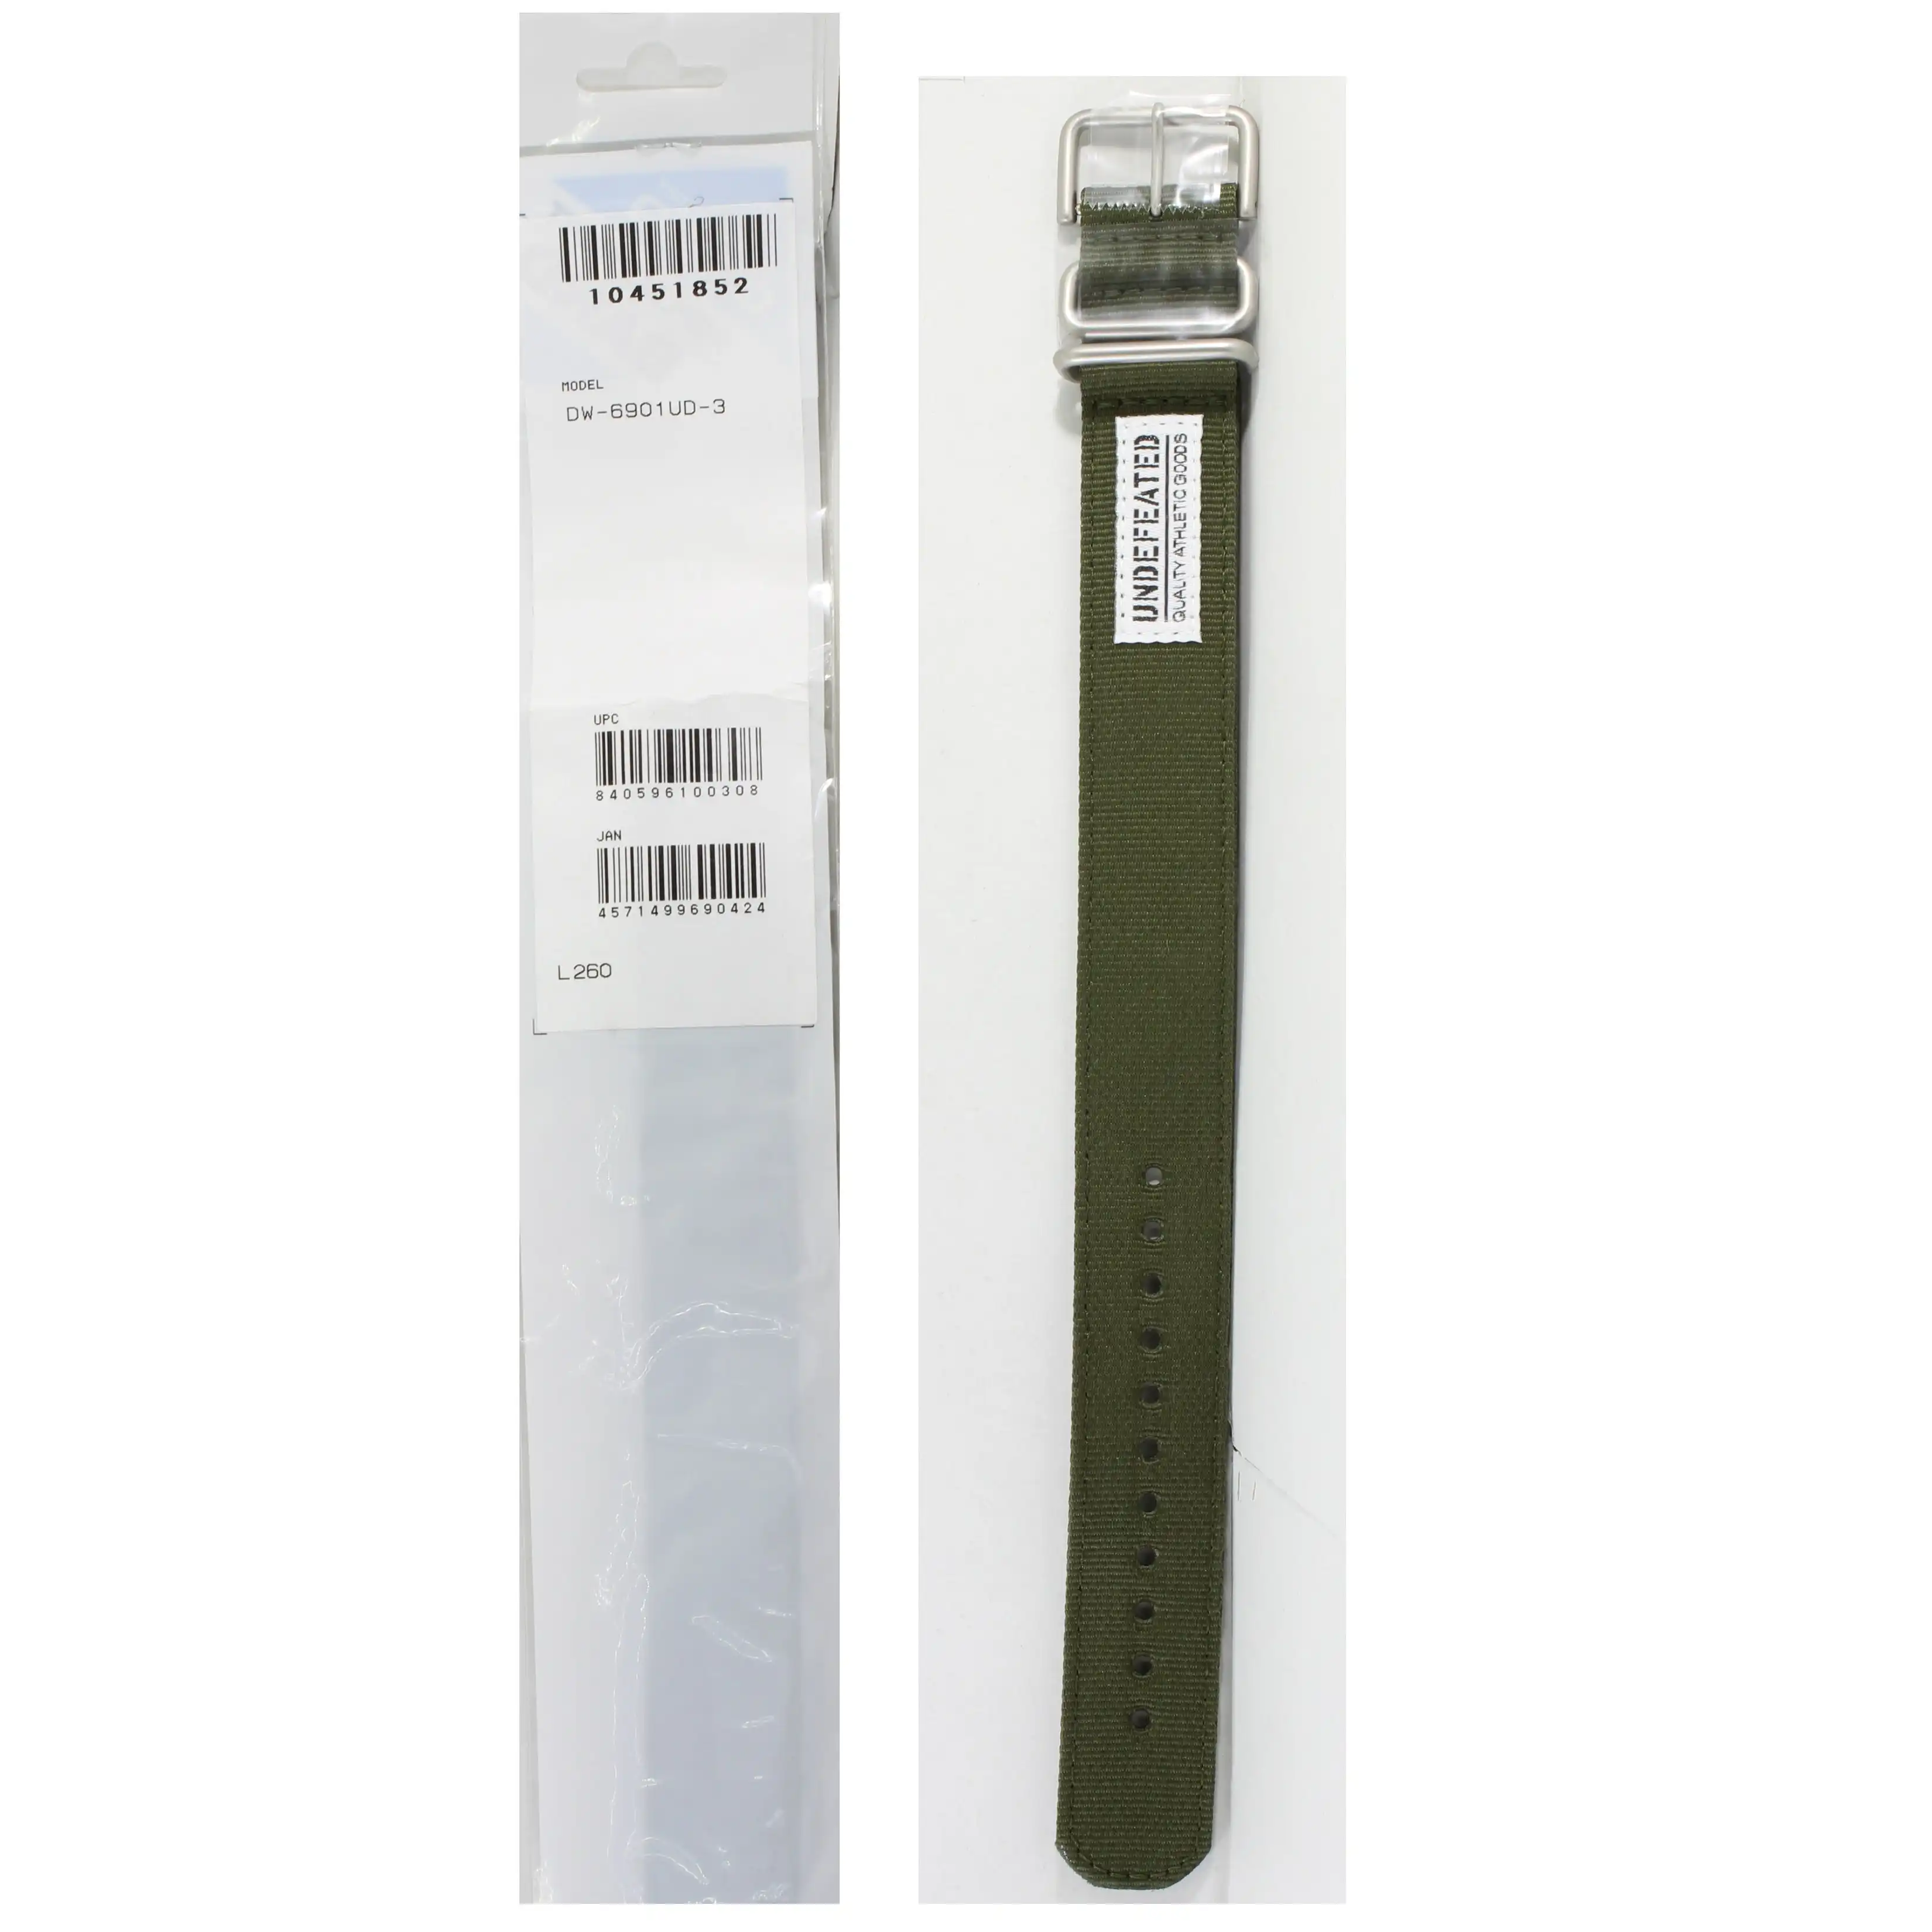 Casio G-Shock Nylon Green Genuine Replacement Strap 10451852 to suit DW-6901UD-3 Undefeated